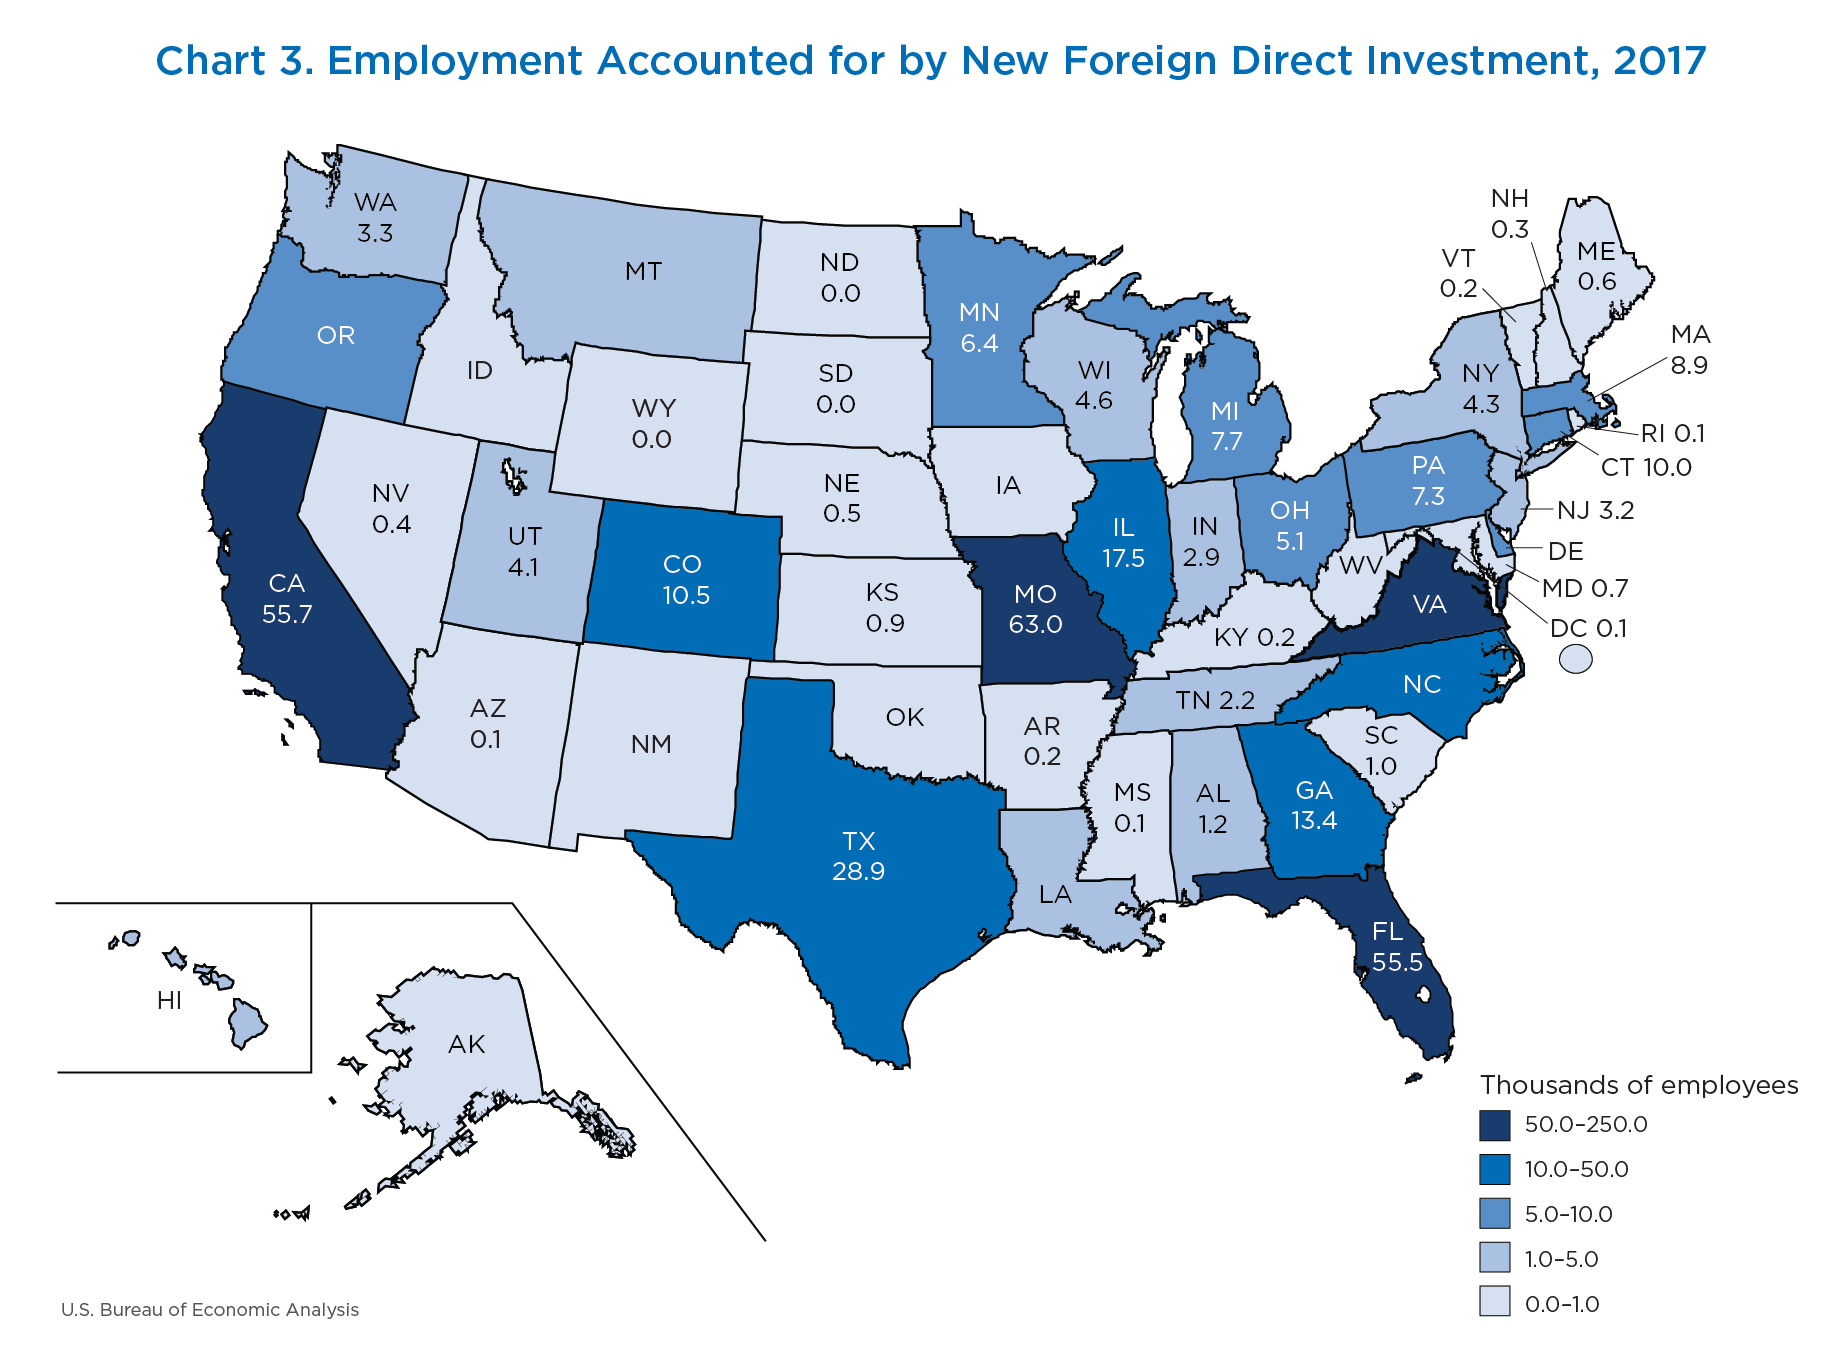 New Foreign Direct Investment in the United States in 2017